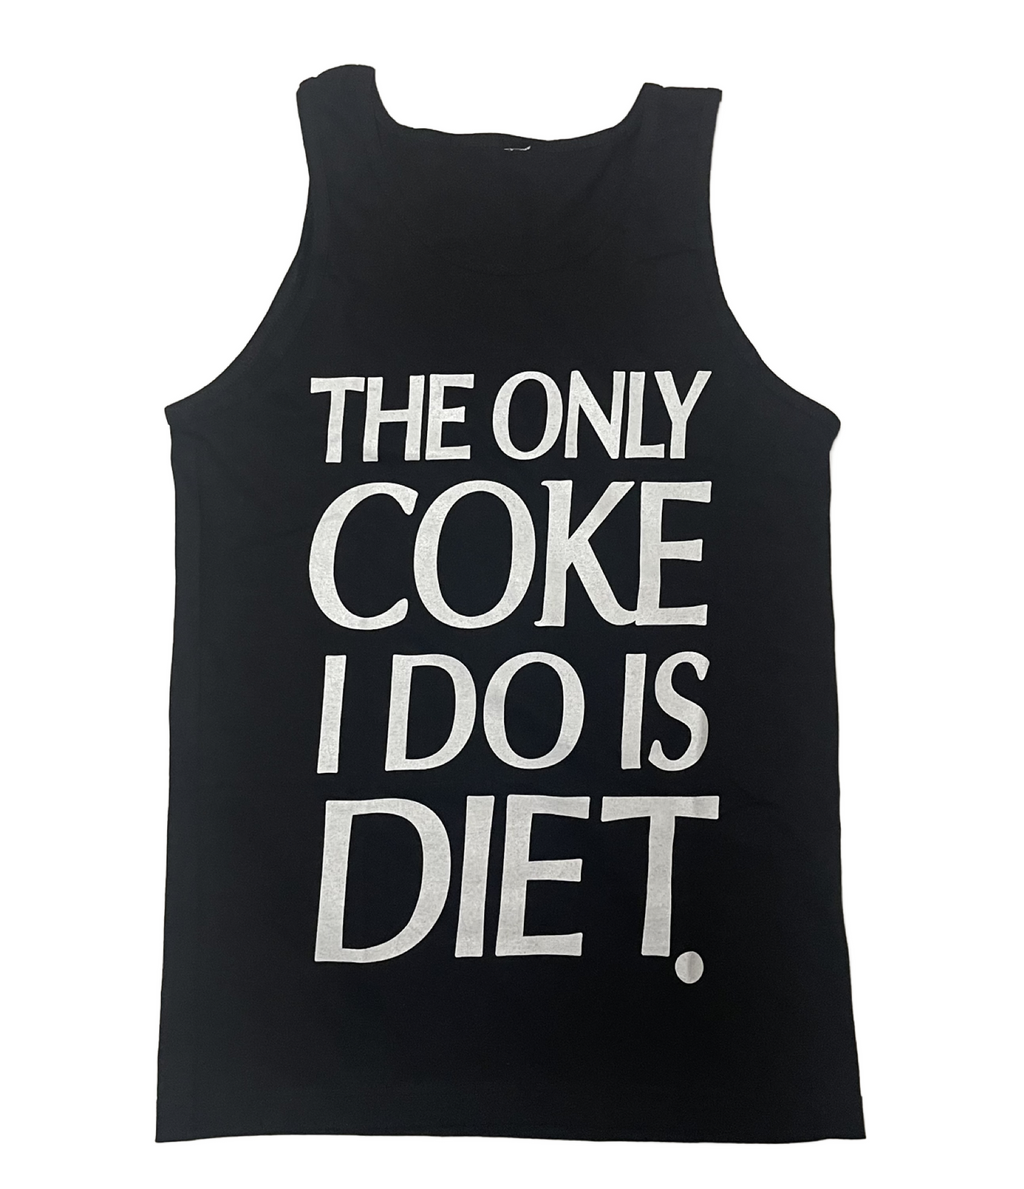 THE ONLY COKE I DO IS DIET TANK TOP